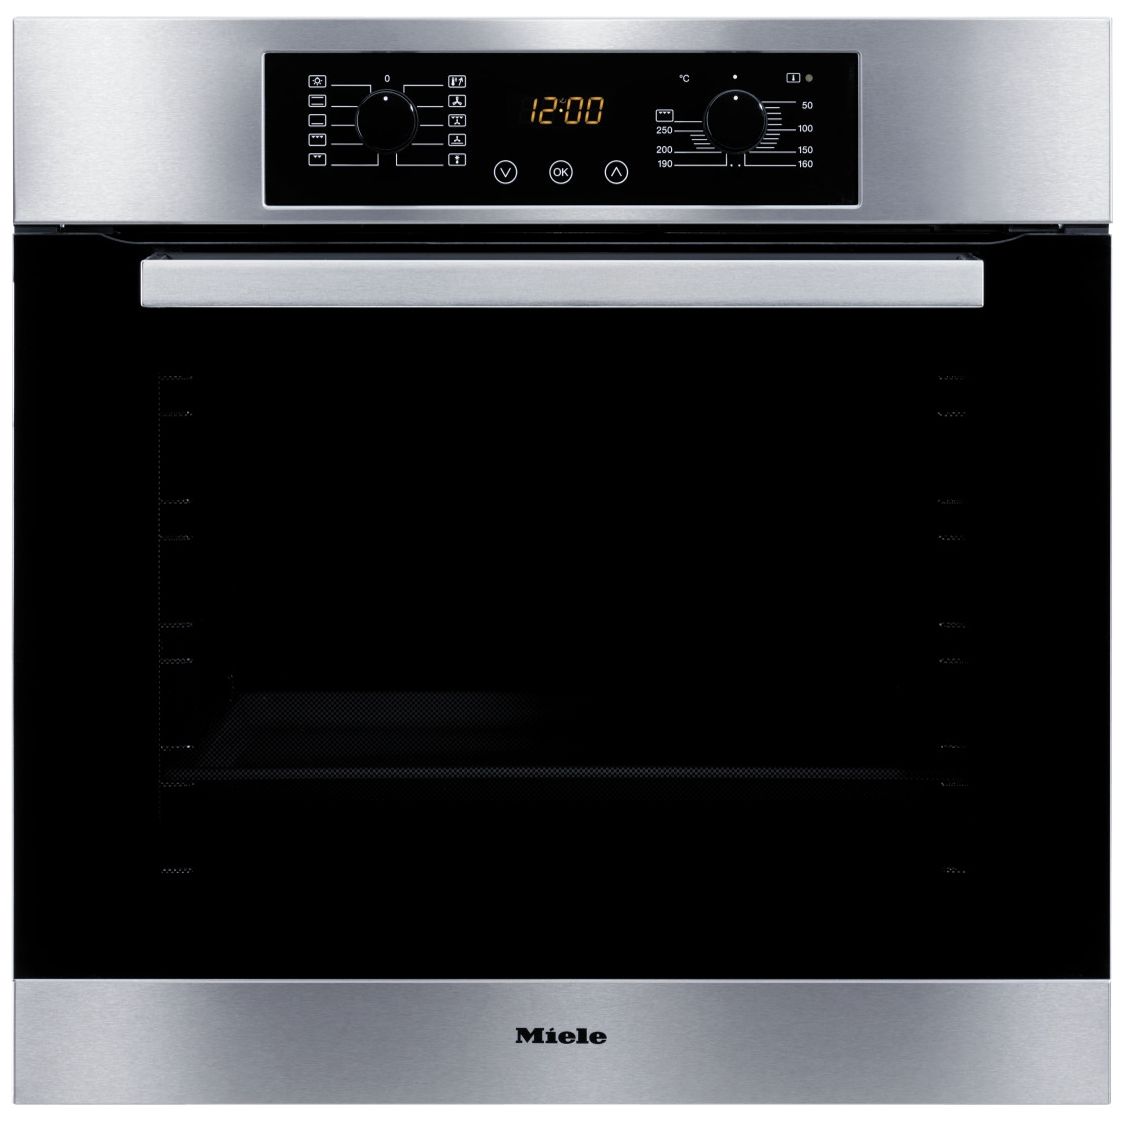 Miele H4810B Single Electric Oven & KM6113 Ceramic Induction Hob, Black/Stainless Steel at JohnLewis